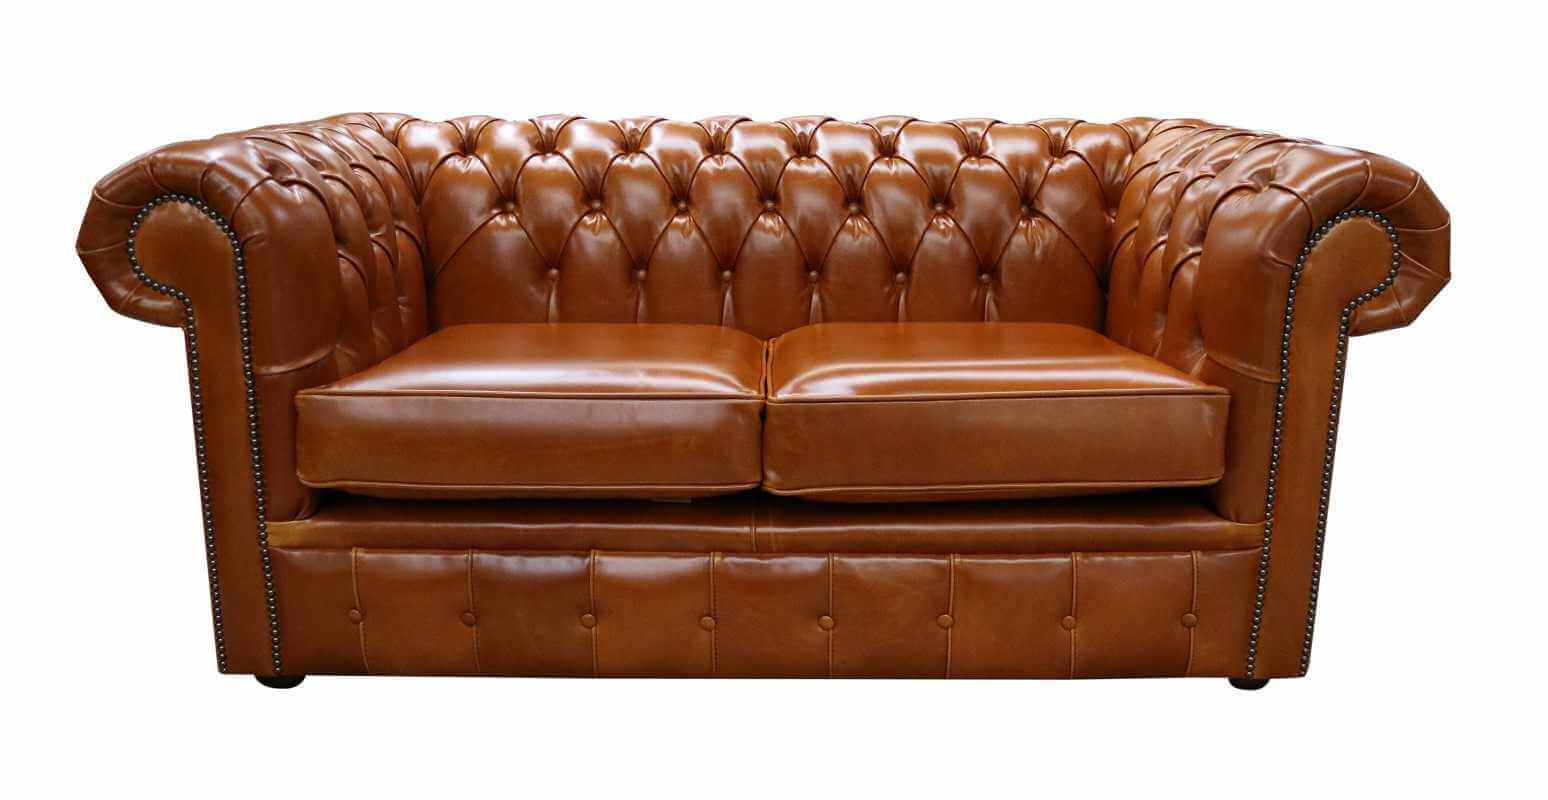 Affordable Elegance Chesterfield Sofa Clearance Deals in the UK  %Post Title